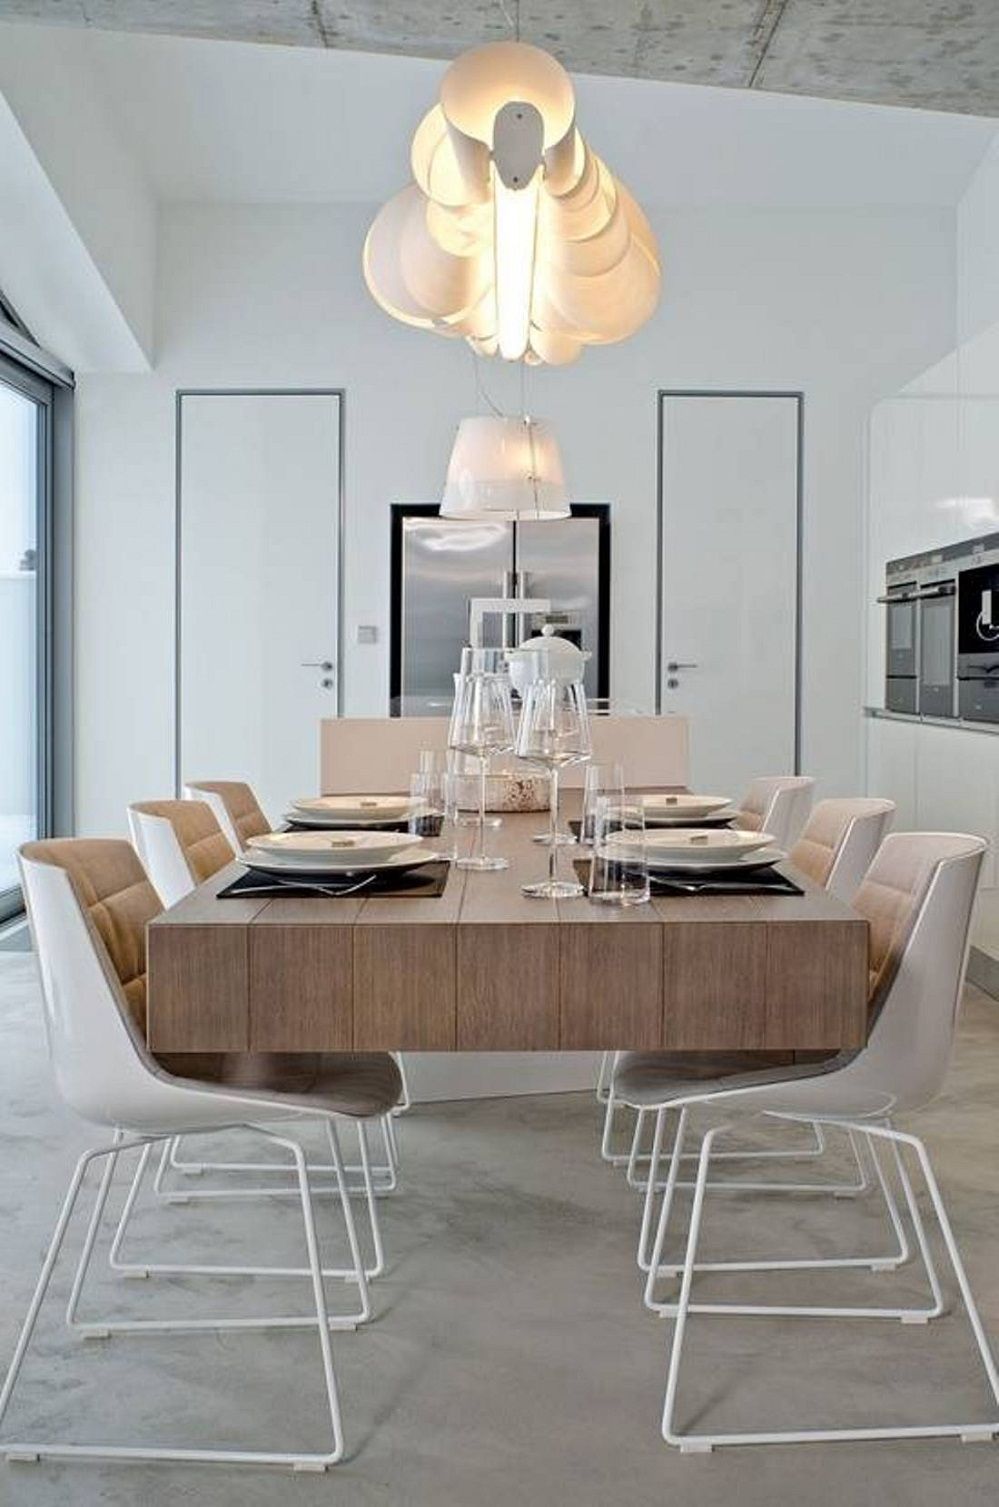 White Contemporary Chandeliers Decorating Home Ideas Trends Intended For White Contemporary Chandelier (View 10 of 15)